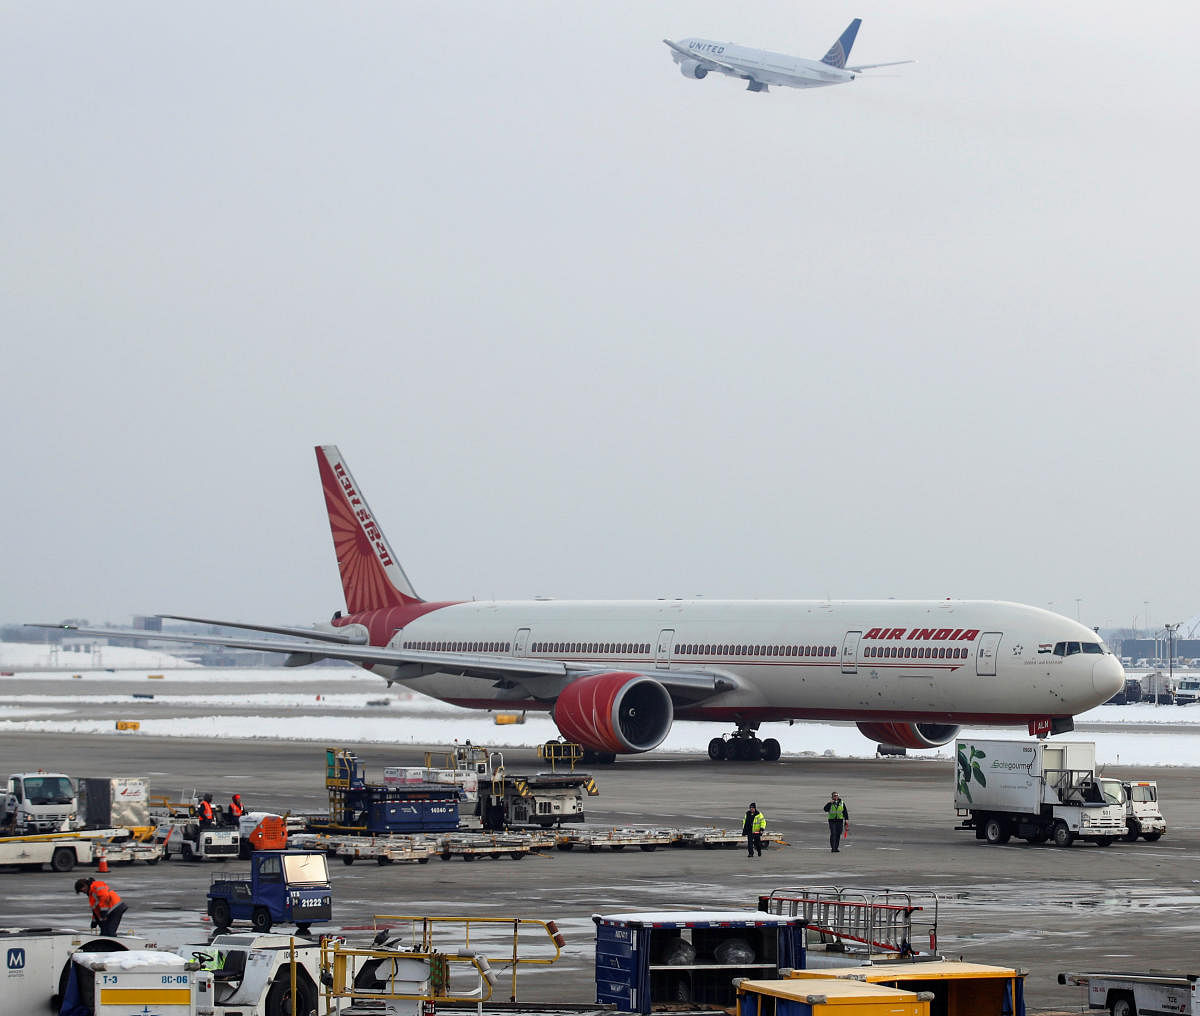 Air India planning to increase utilisation of aircraft